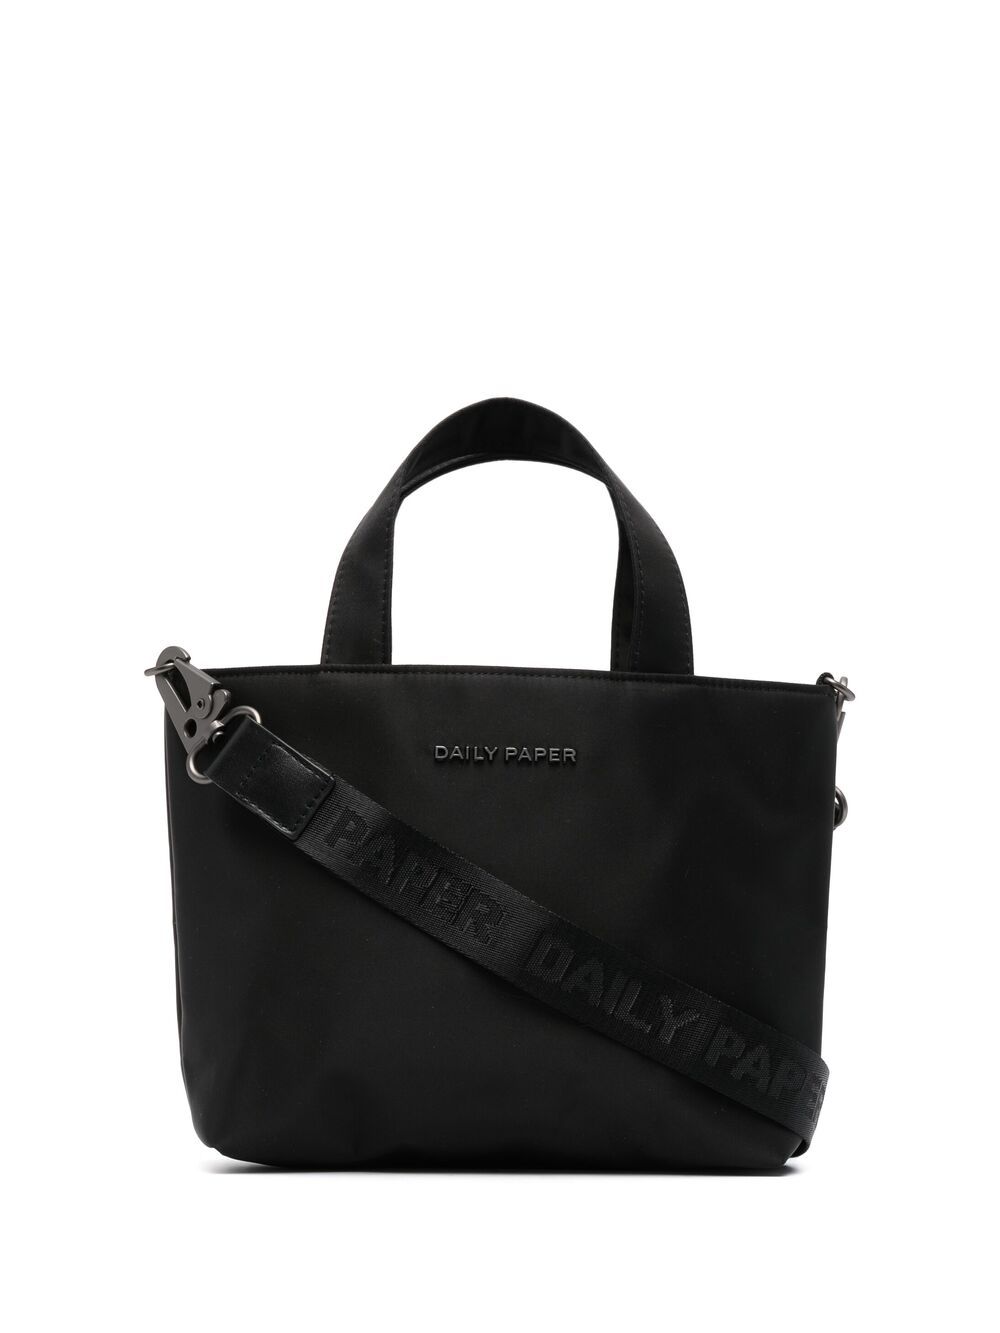 Daily Paper Etiny Bag 2021139 In Black